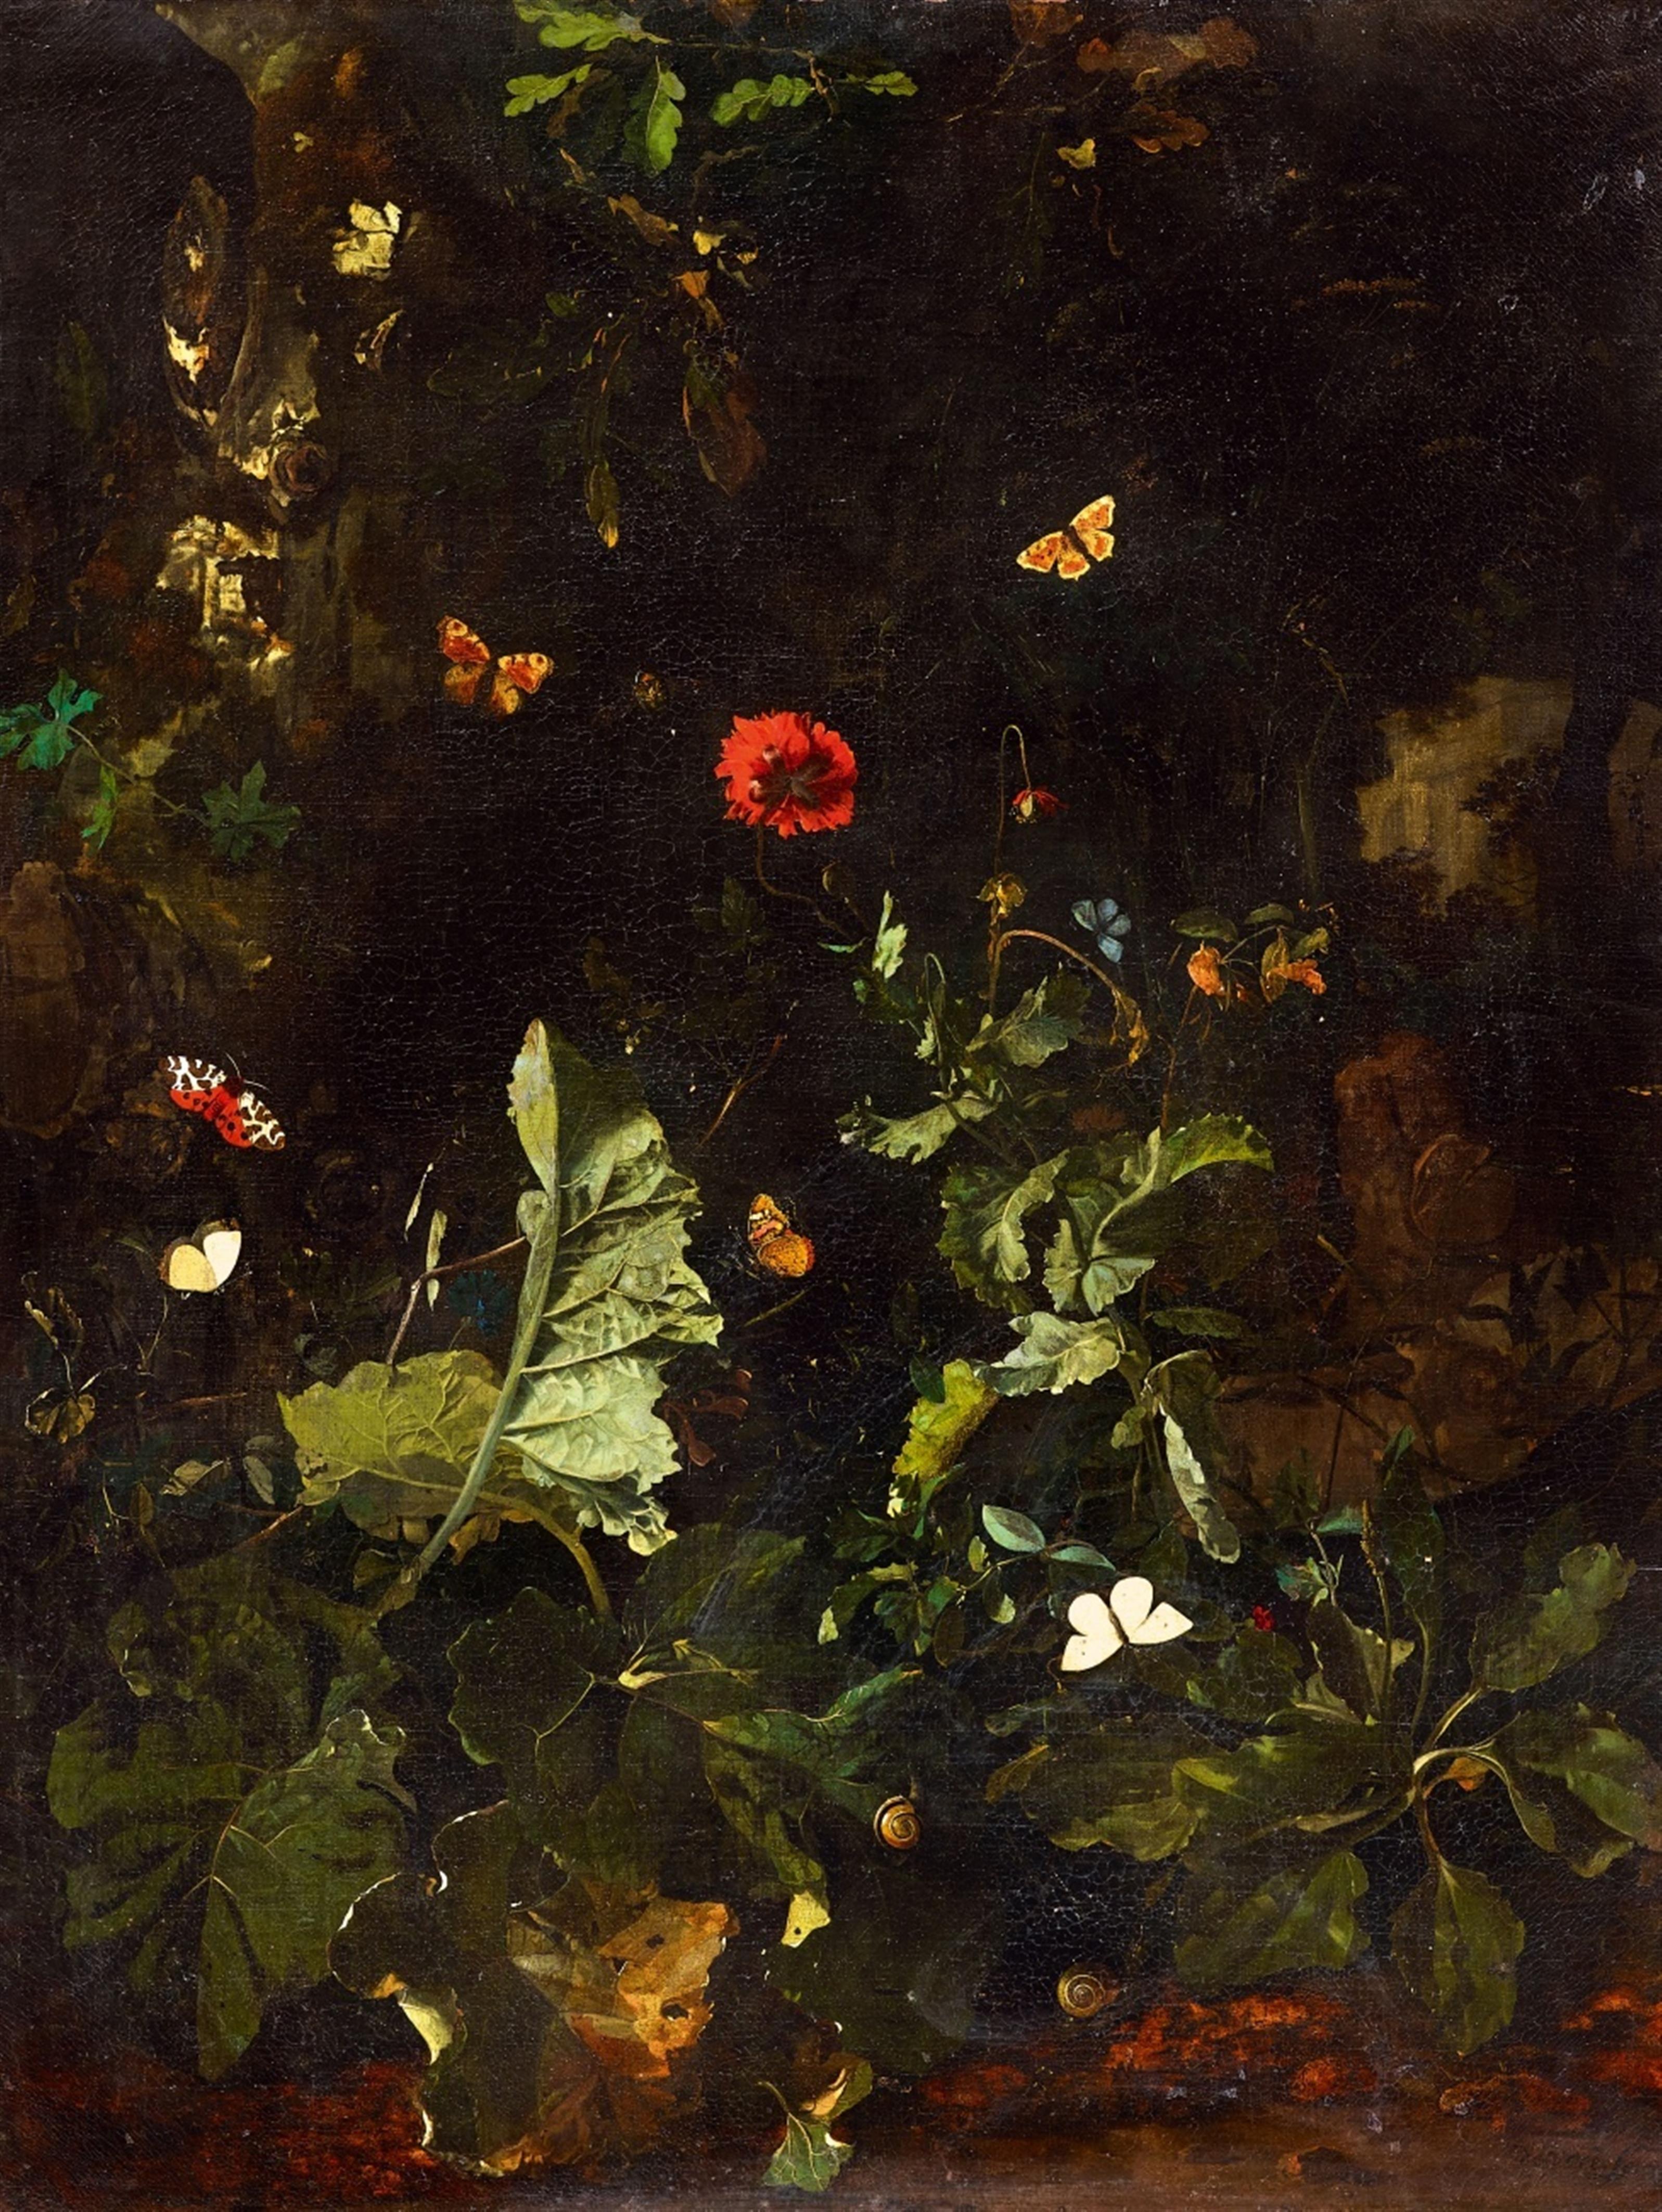 Nicolaes de Vree - A Forest Still Life with Butterflies - image-1